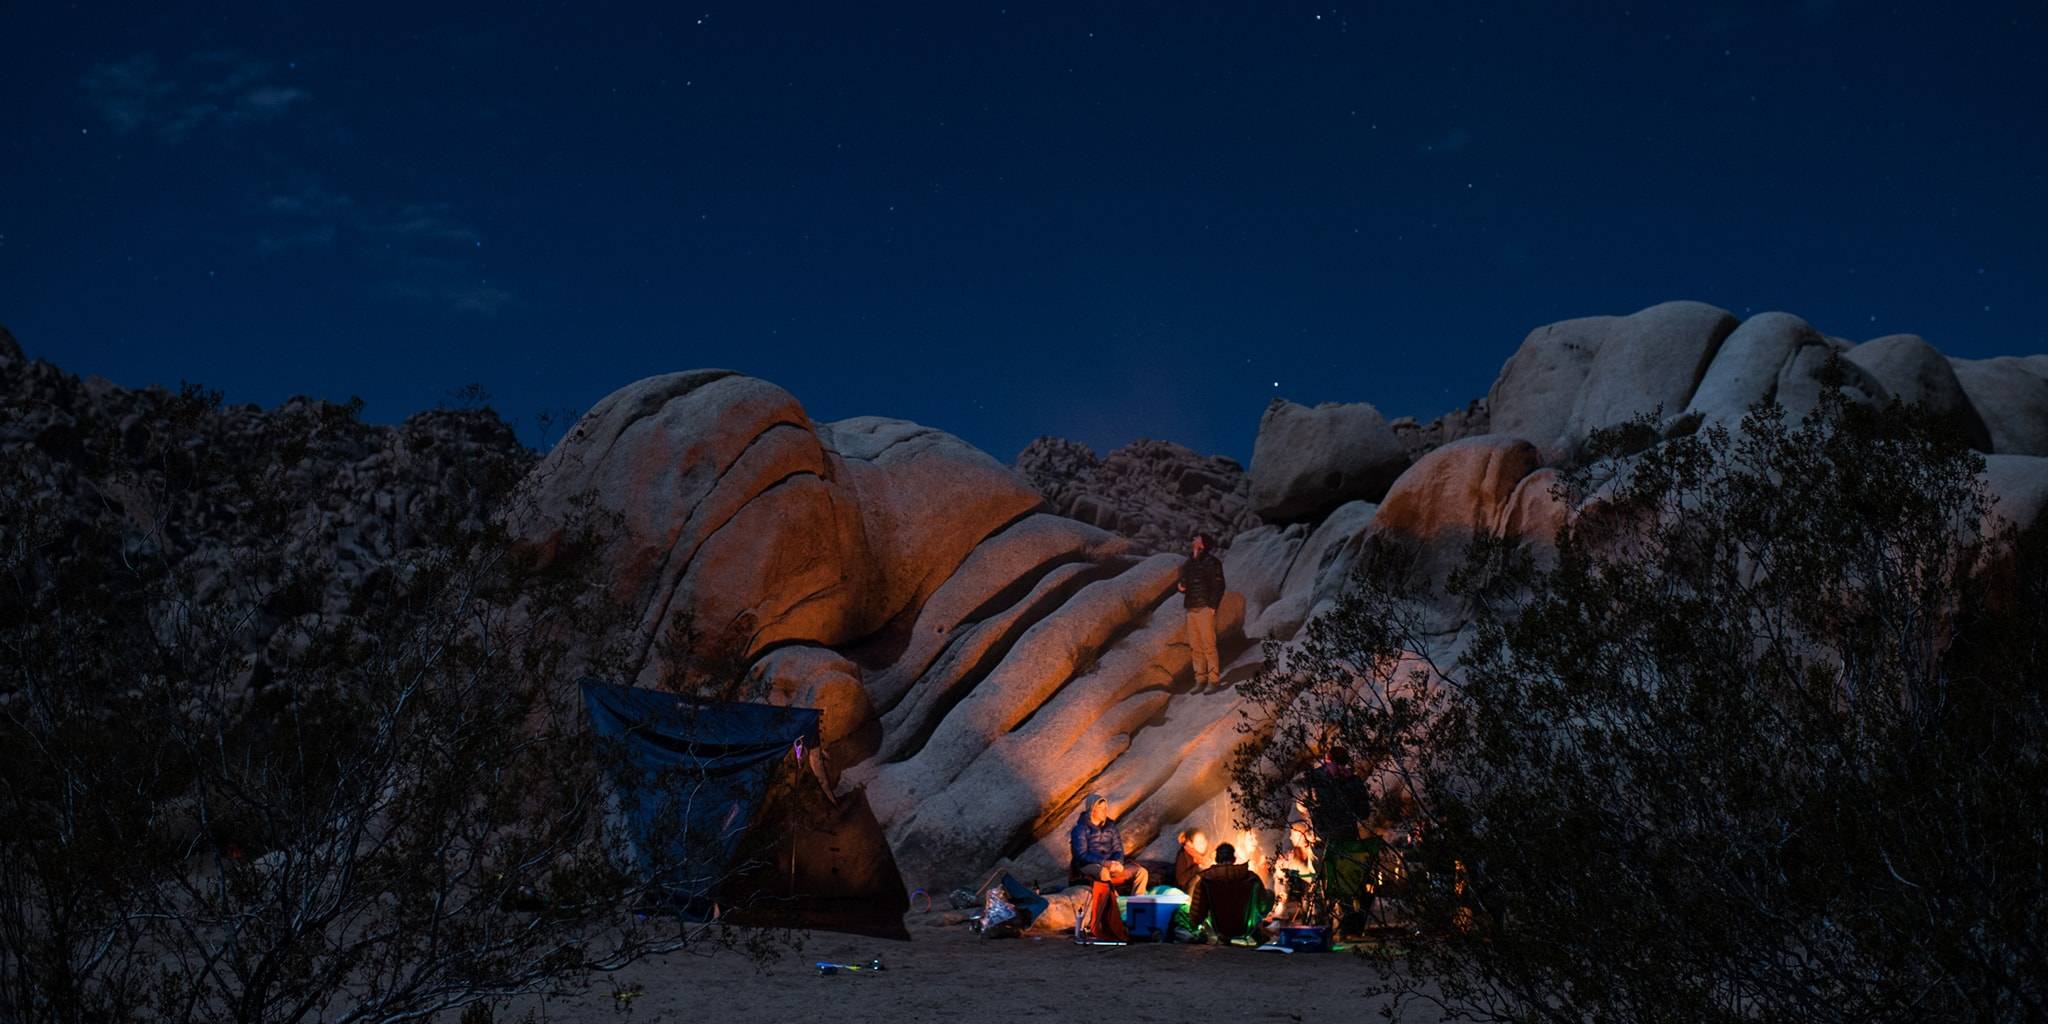 Group of campers with a campfire in Joshua Tree at night